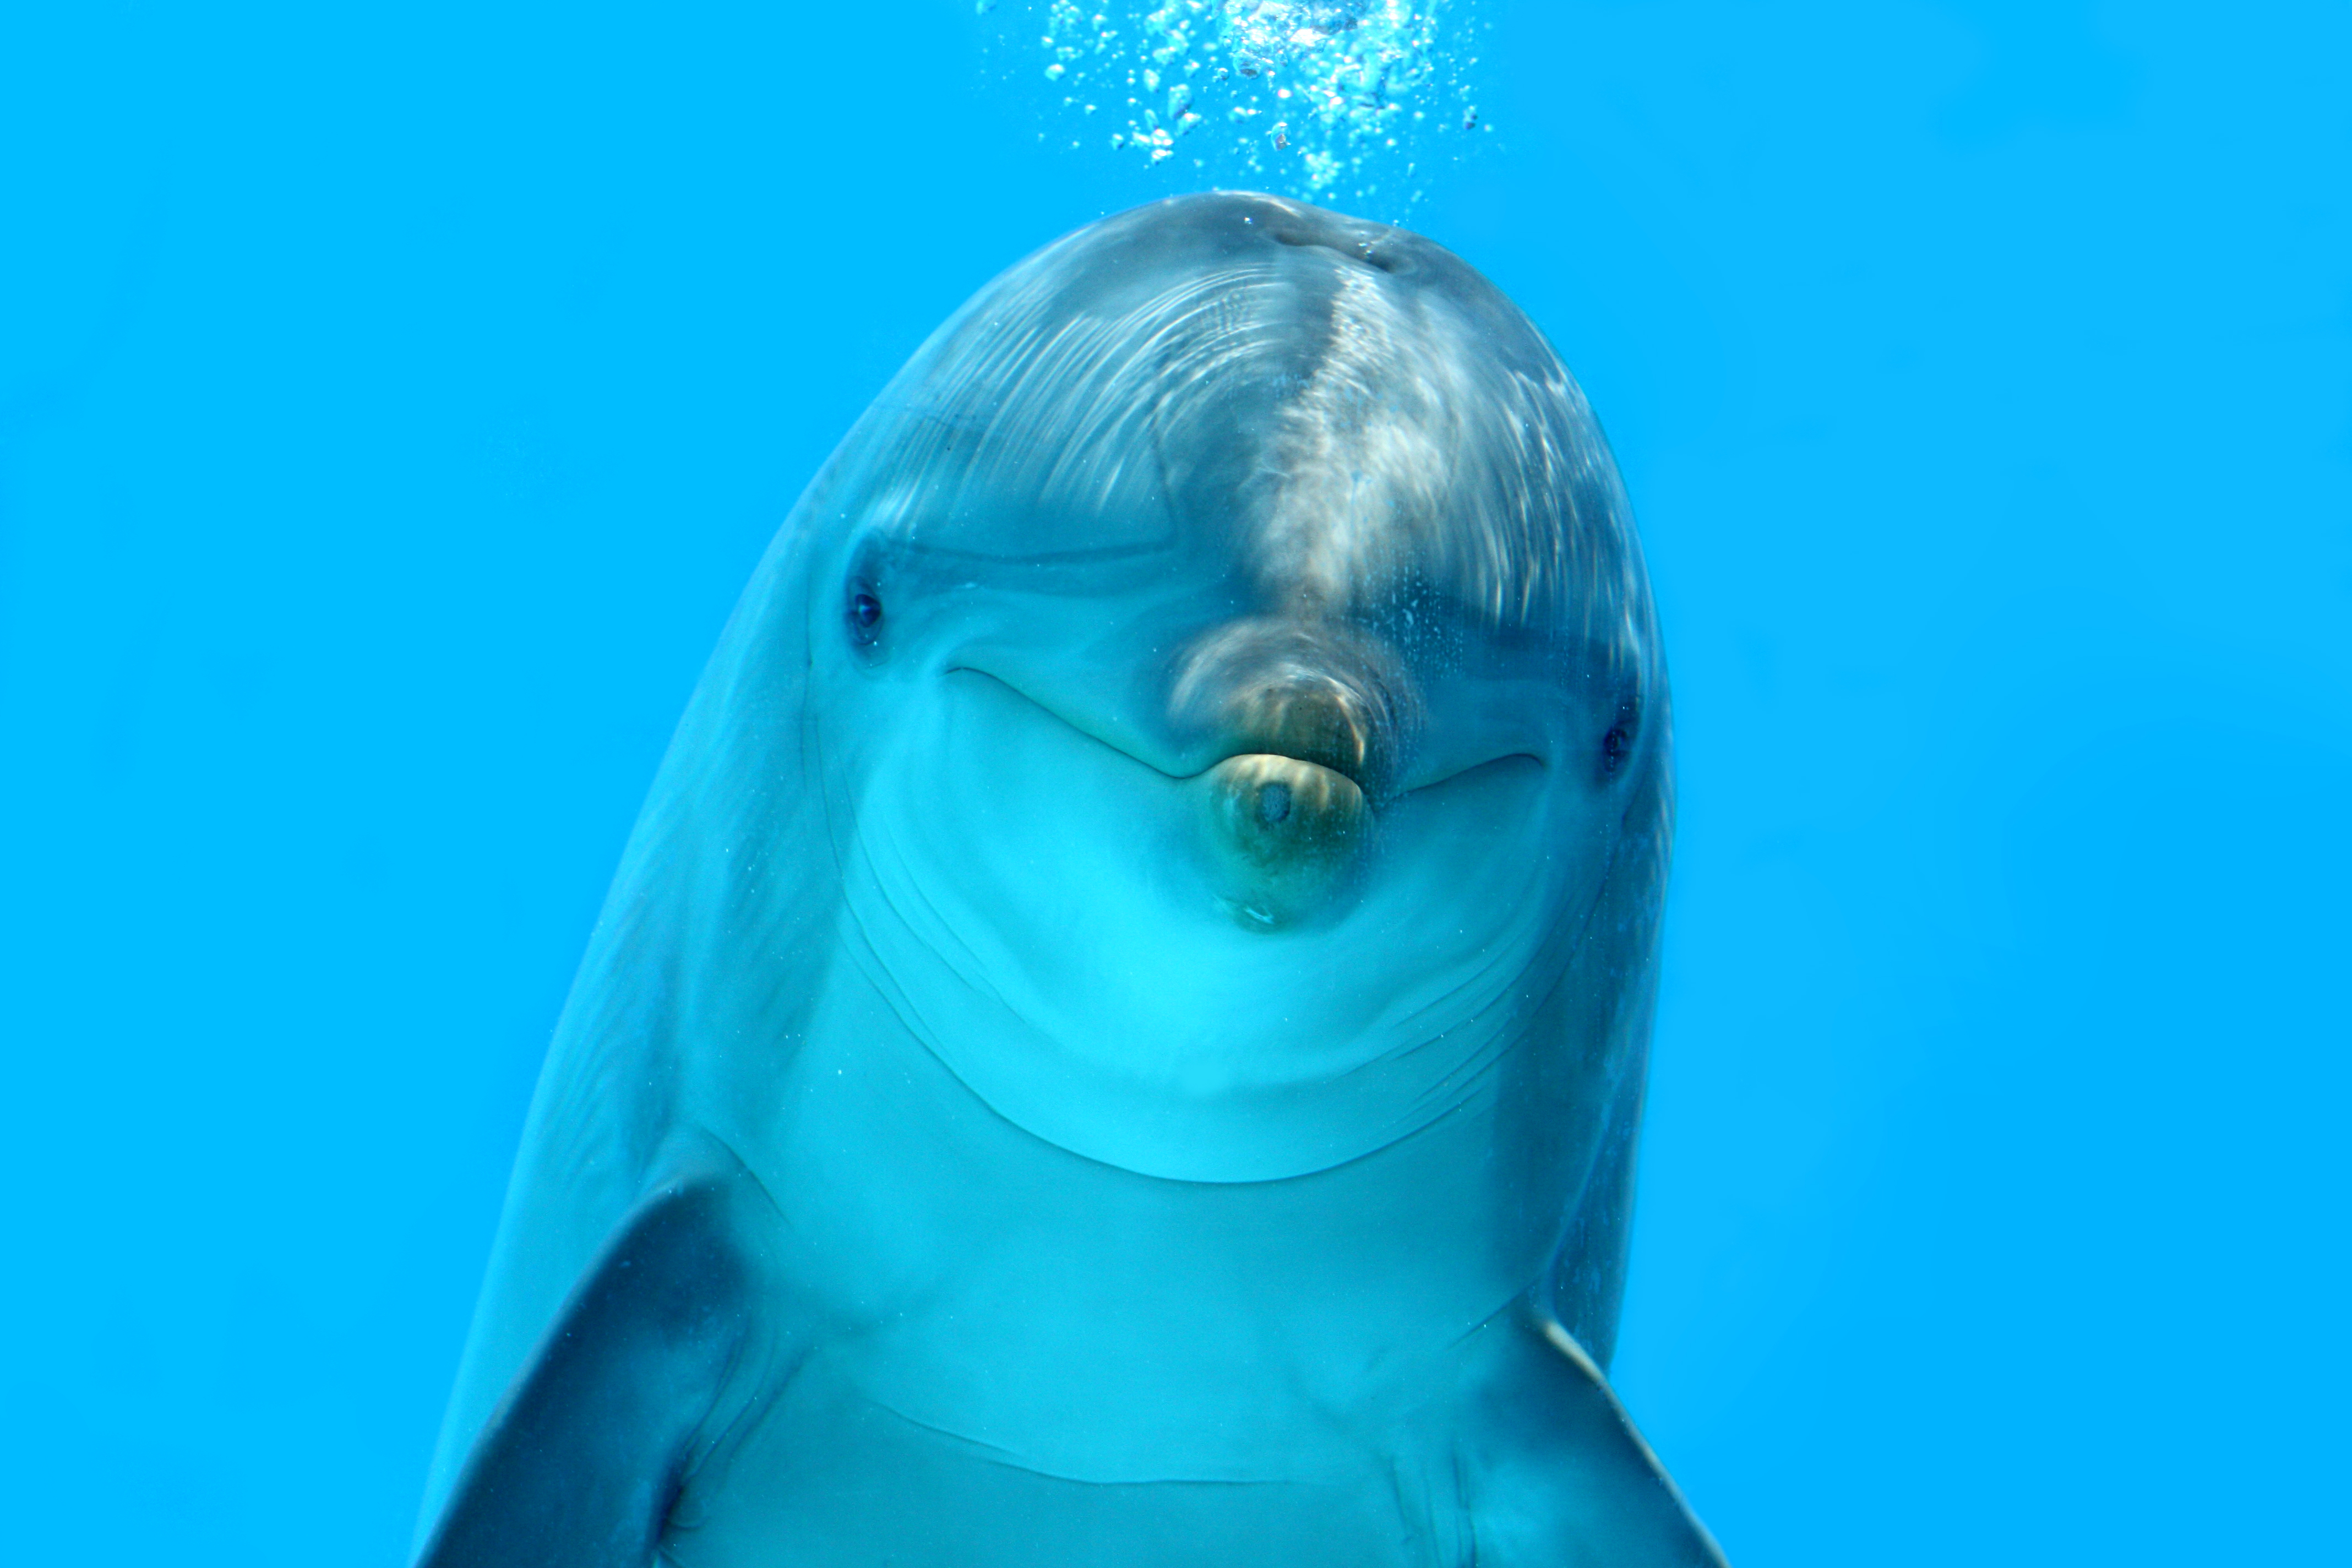 Dolphin 4K Wallpapers